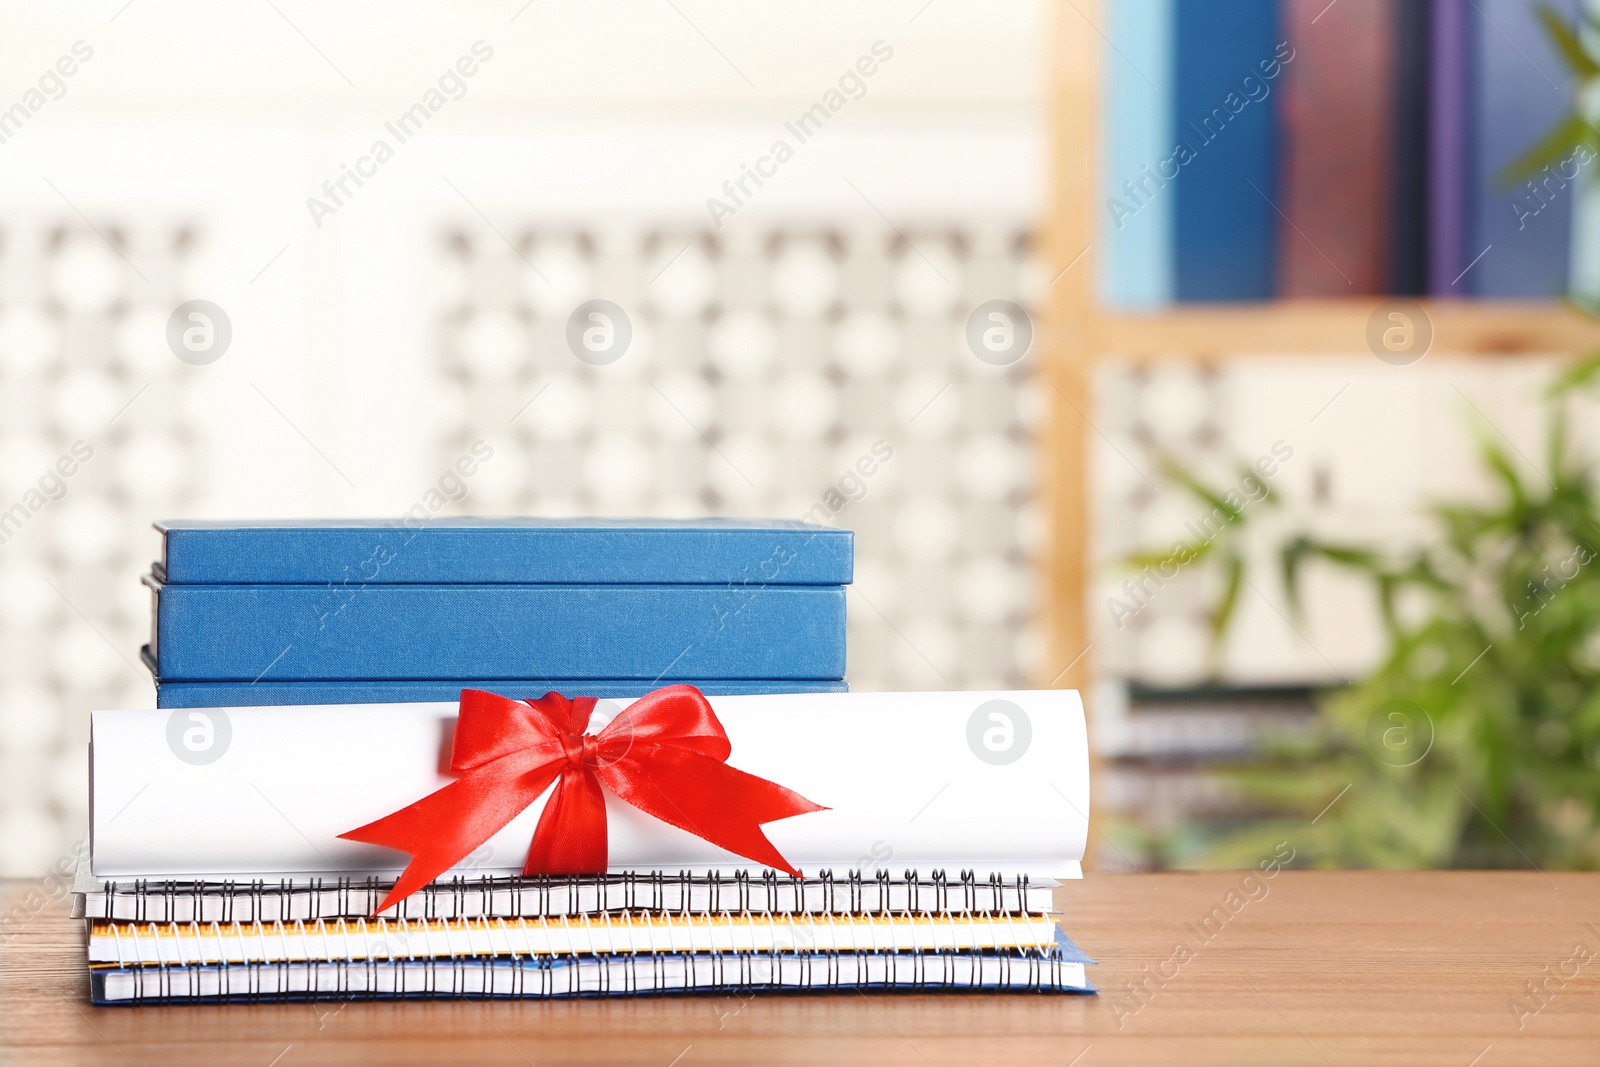 Photo of Graduate diploma with books and notebooks on table against blurred background